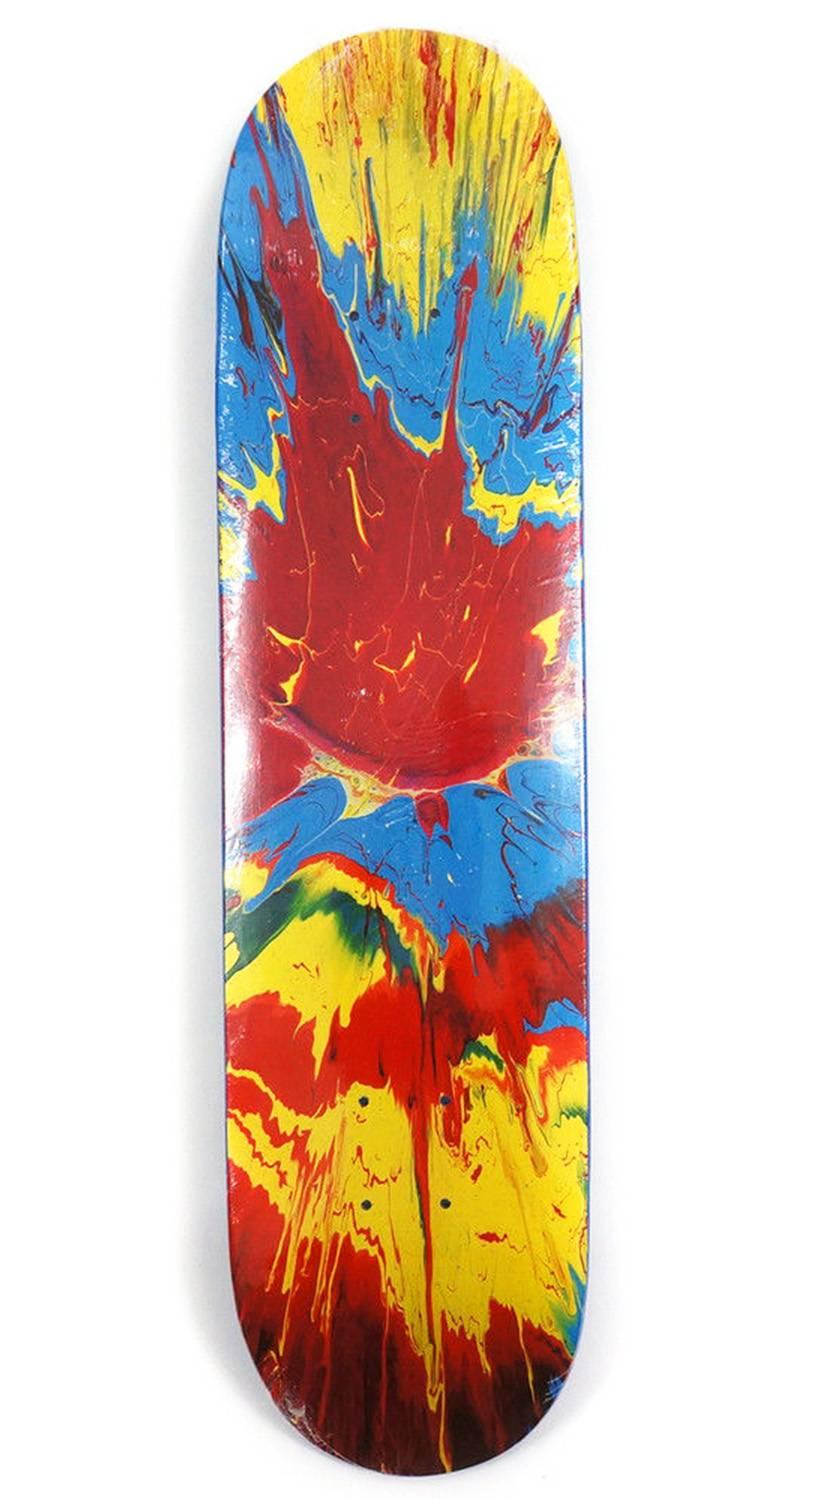 Damien Hirst Spin Series Skate Deck, Supreme 2009

Medium: Screenprint in colors on polychrome wood skateboard deck

Dimensions: 31.1 x 7.68 in (78.99 x 19.51 cm) 

Stamped signature and Supreme logo on reverse